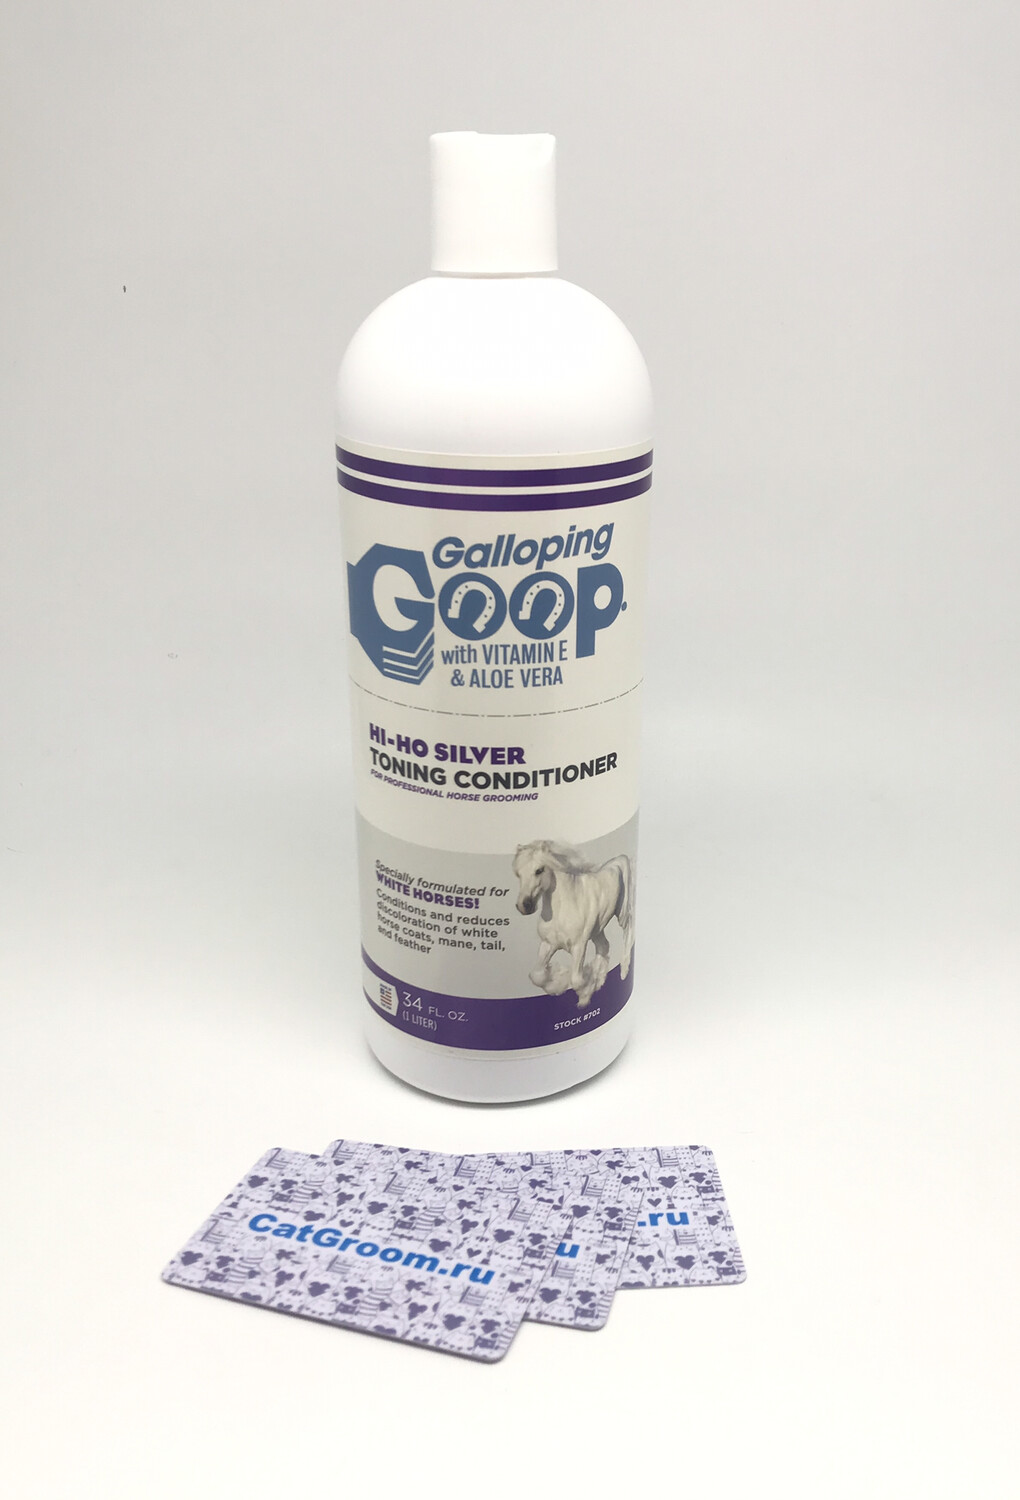 #702 Galloping Goop High-Ho Silver Toning Conditioner 34 oz. Squeeze Bottle